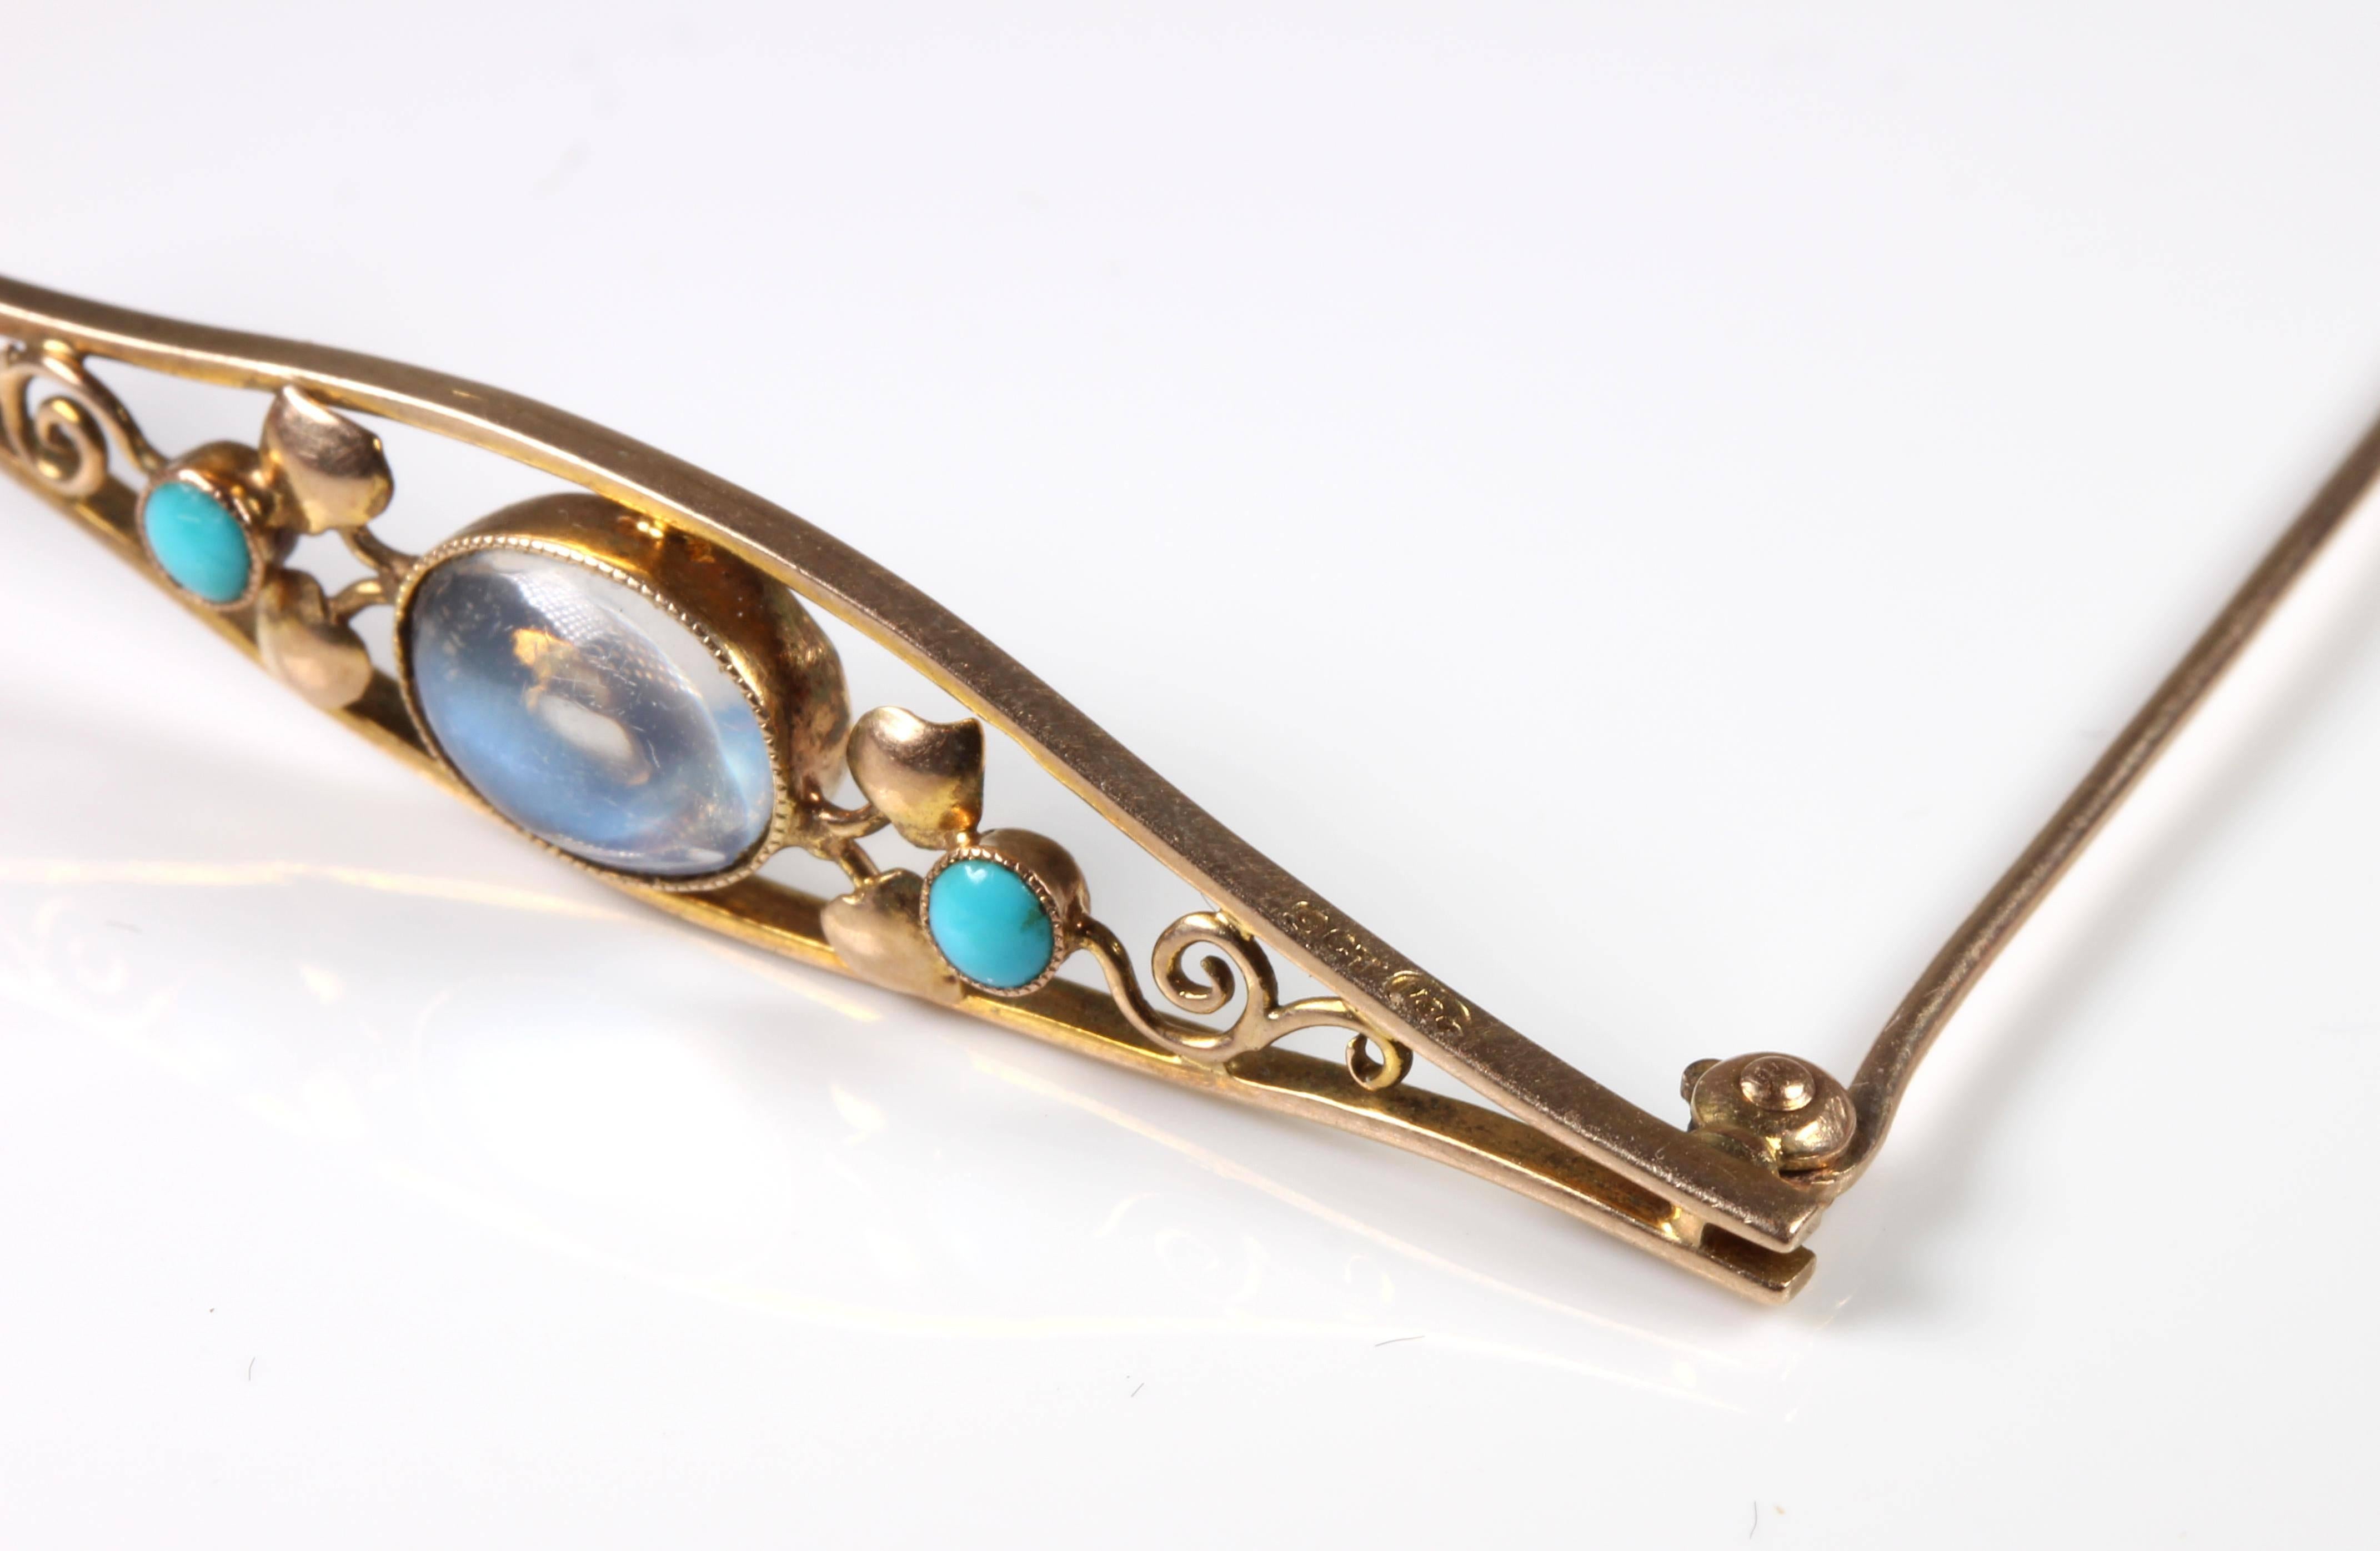 Murrle, Bennett and Co (1886-1914) were an Anglo-German design company based in Pforzheim, Germany. They produced pieces for Liberty of London. Gorgeous 9ct Gold Moonstone Brooch set with 2 round Turquoise and 4 gold tulips in a pleasing Art Nouveau